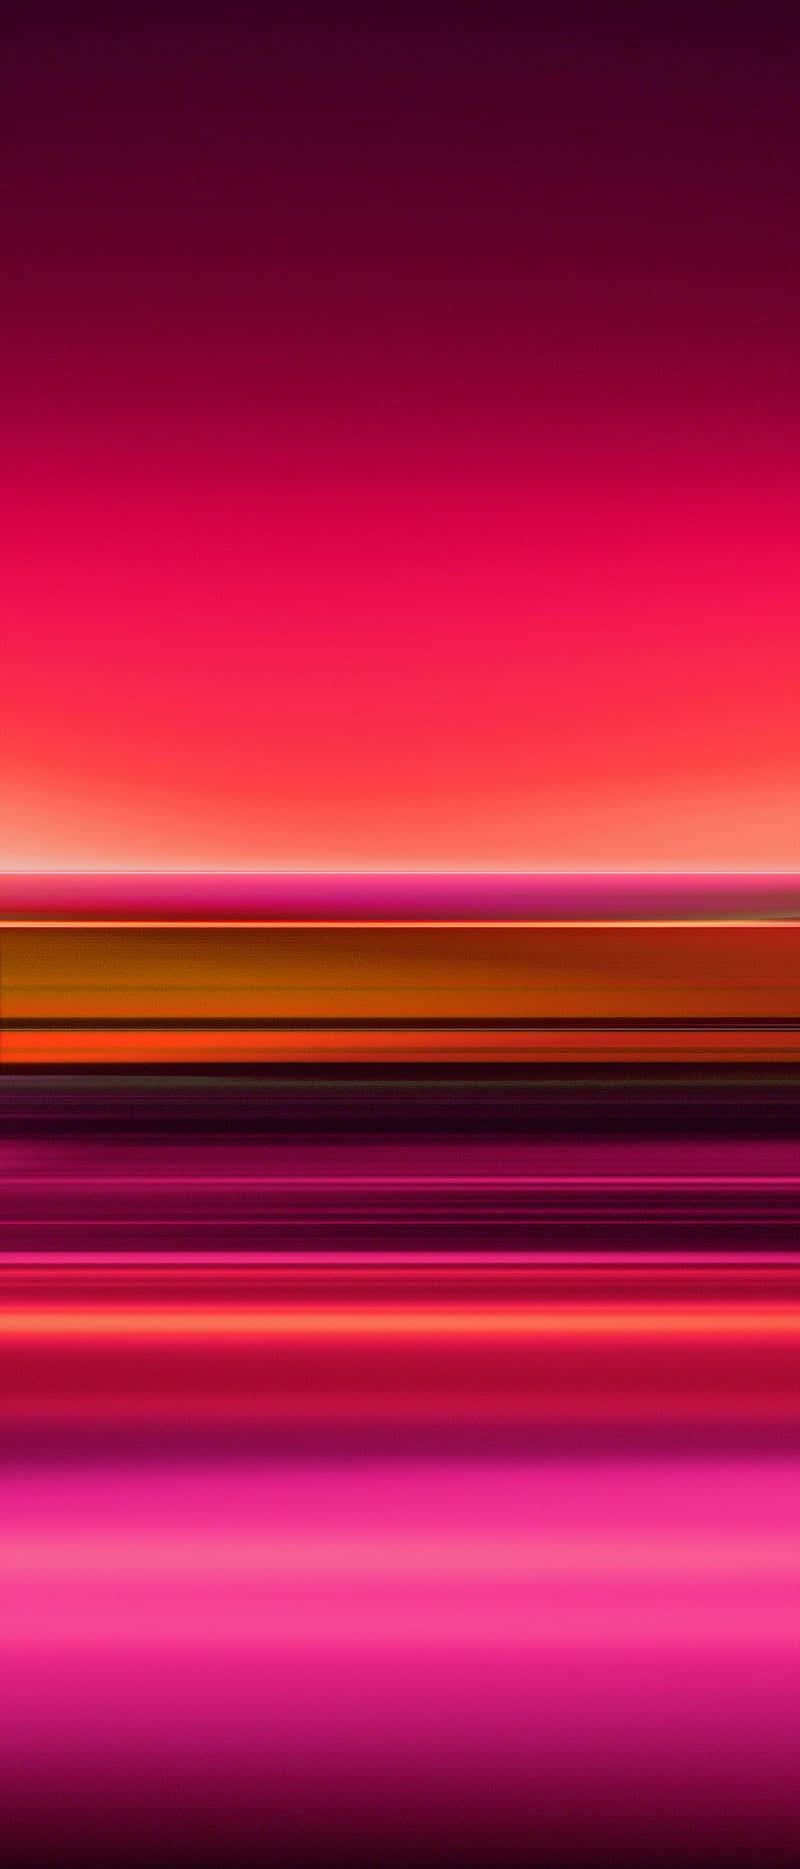 Abstract Pink And Orange Abstract Background Wallpaper